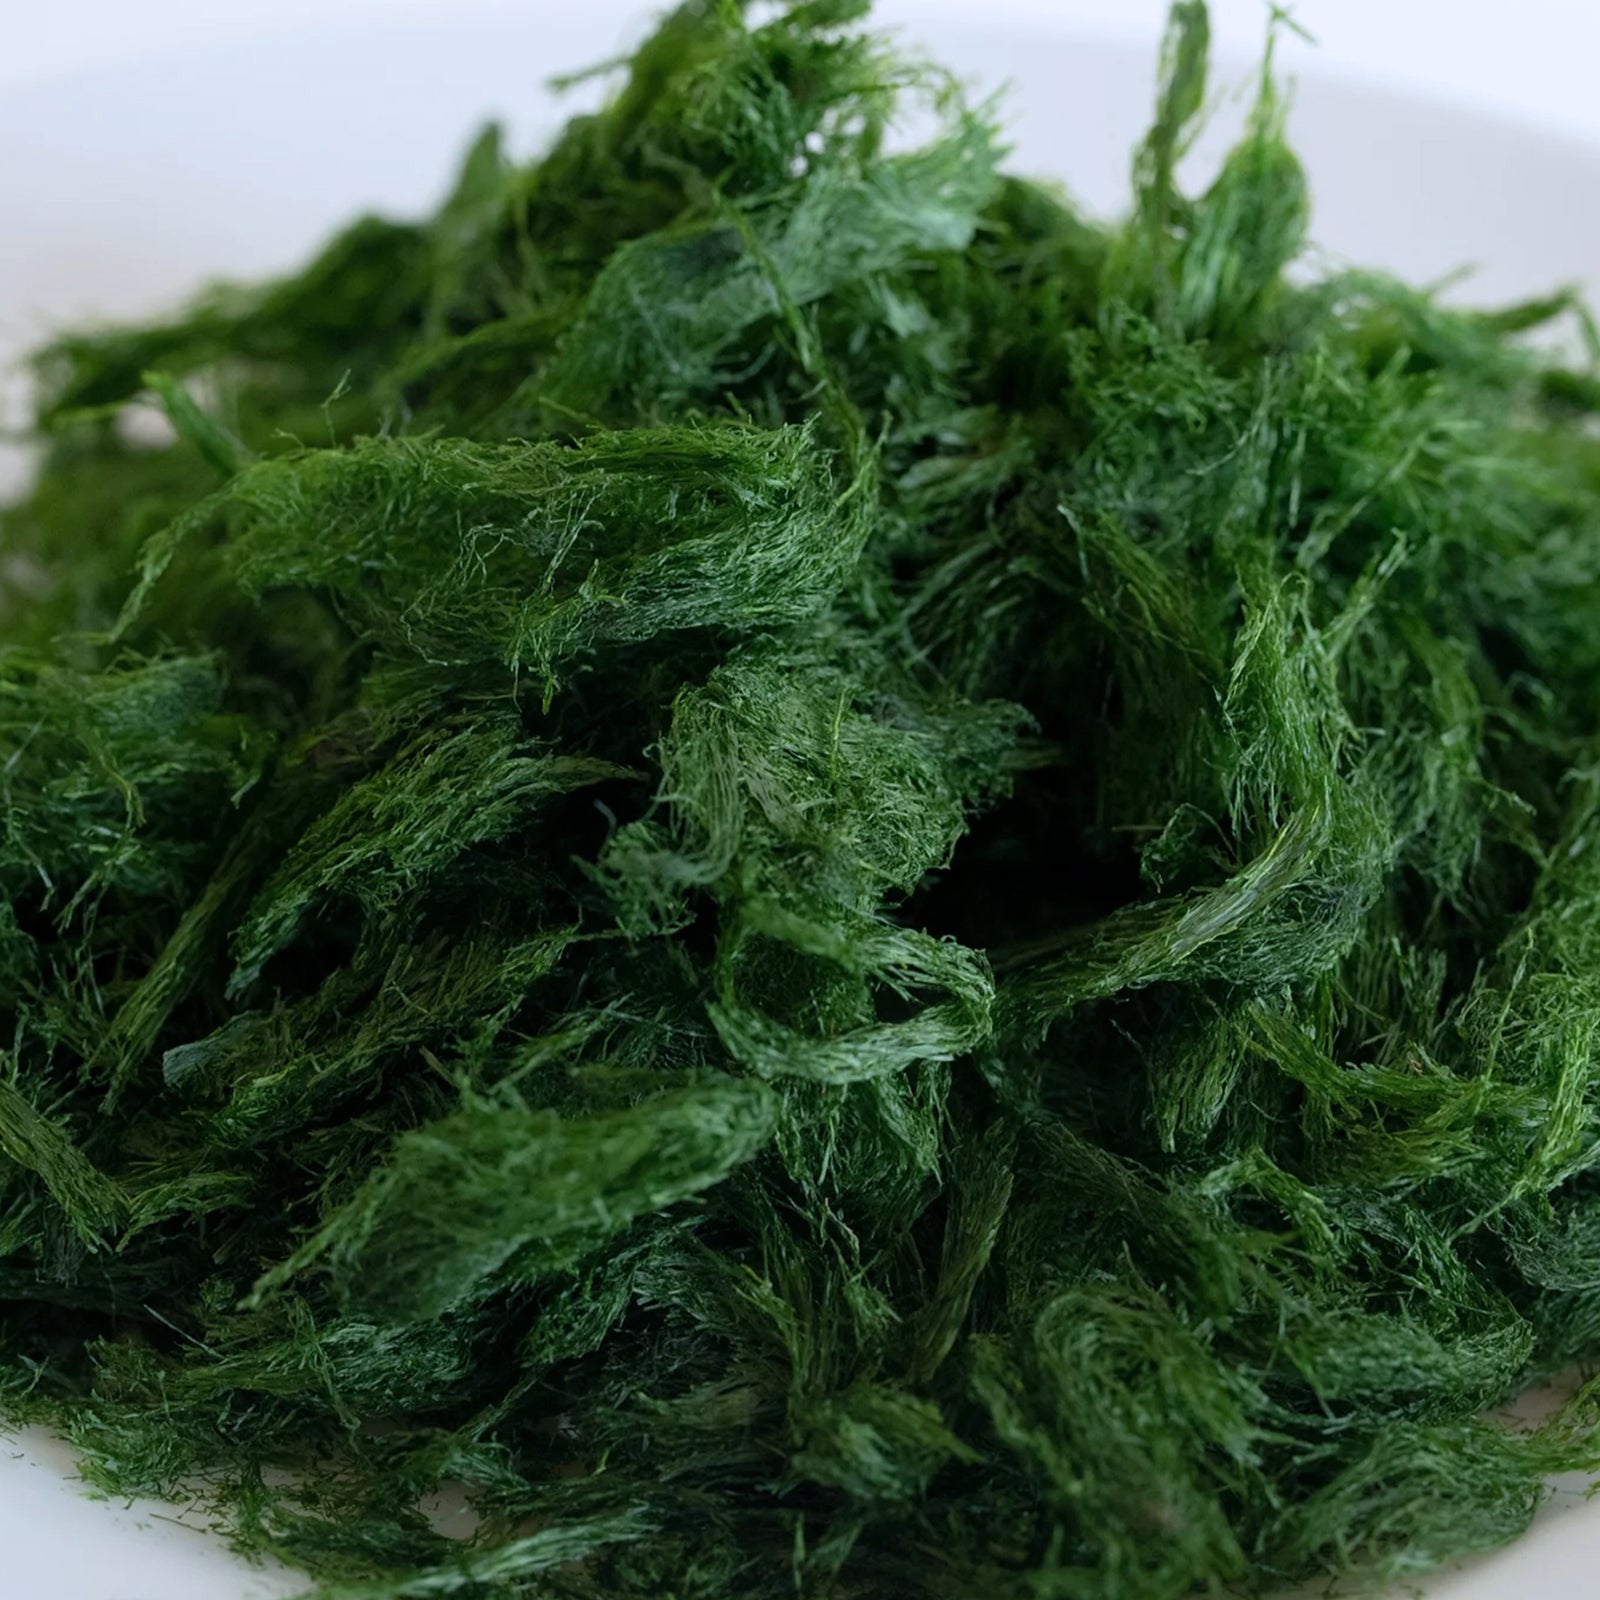 All-Natural Additive-Free Premium Dried Nori Seaweed from Japan (7g x 2)